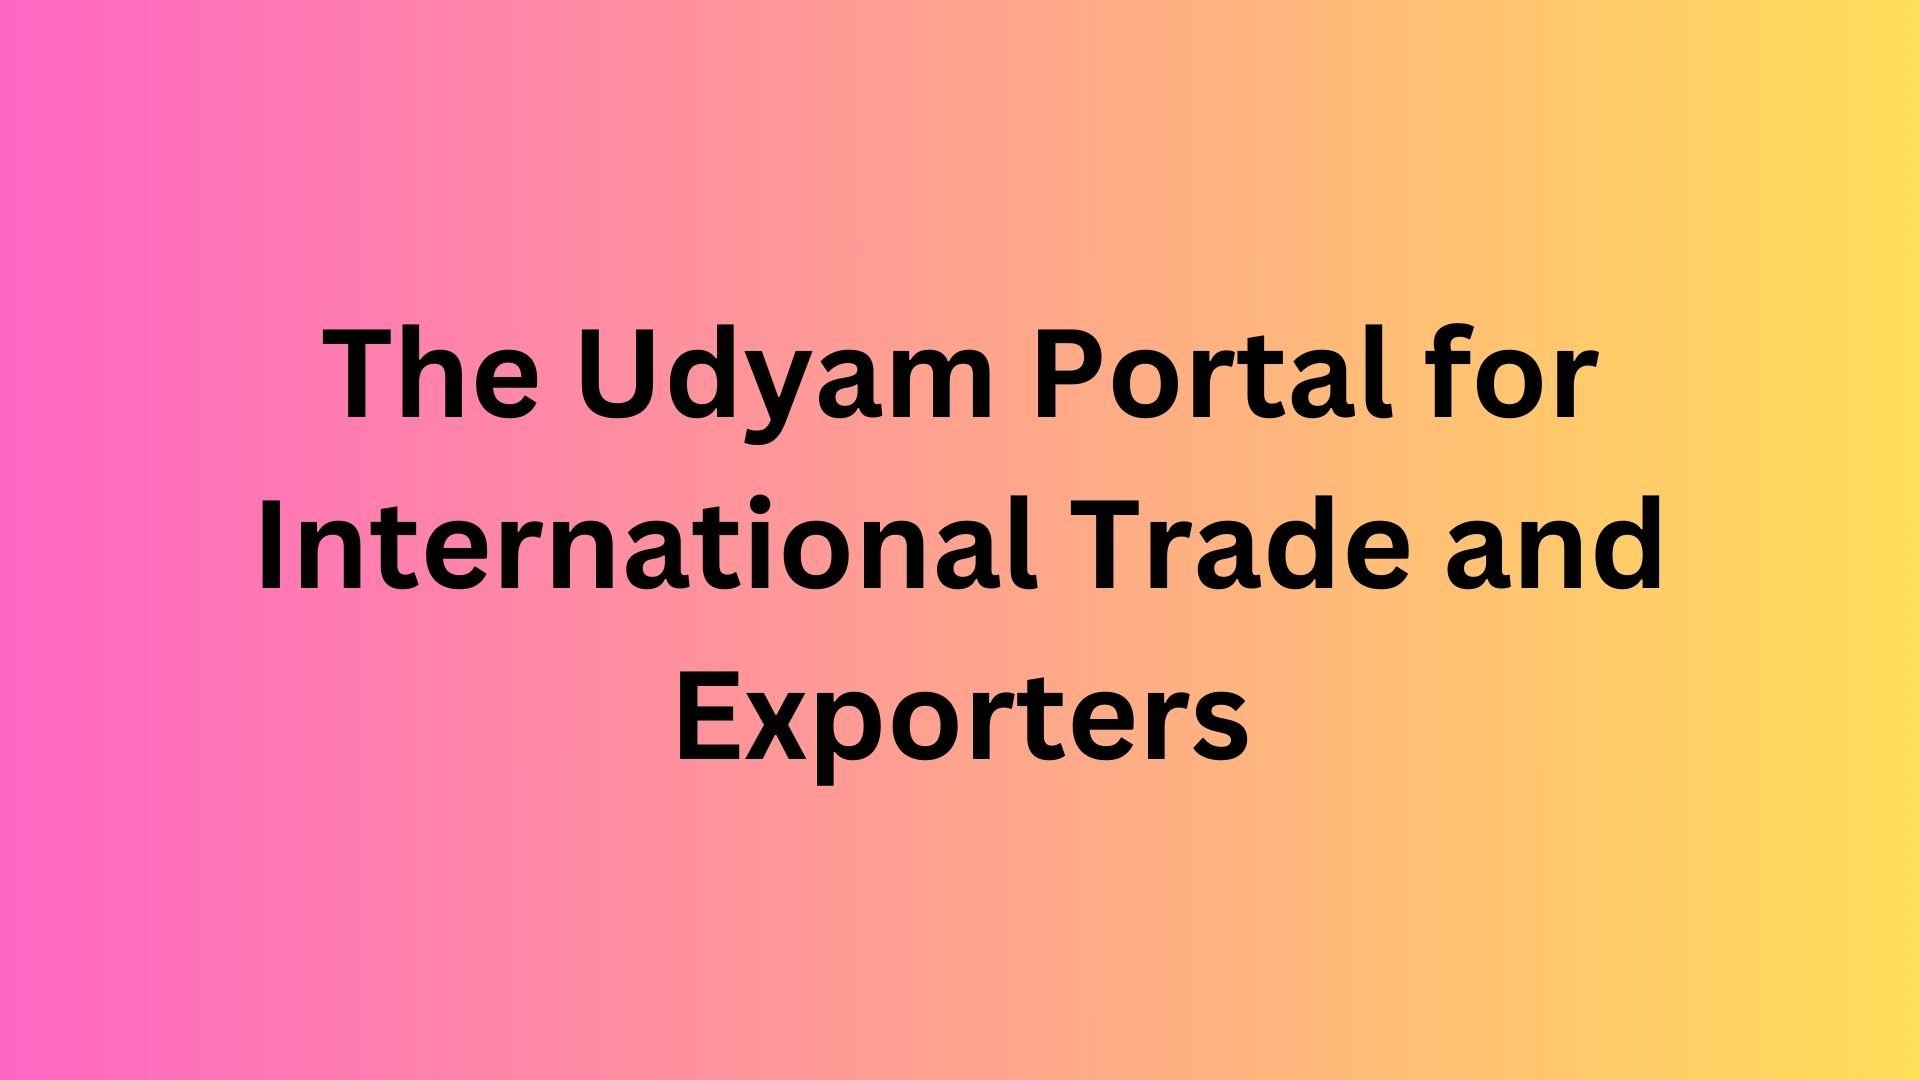 The Udyam Portal for International Trade and Exporters